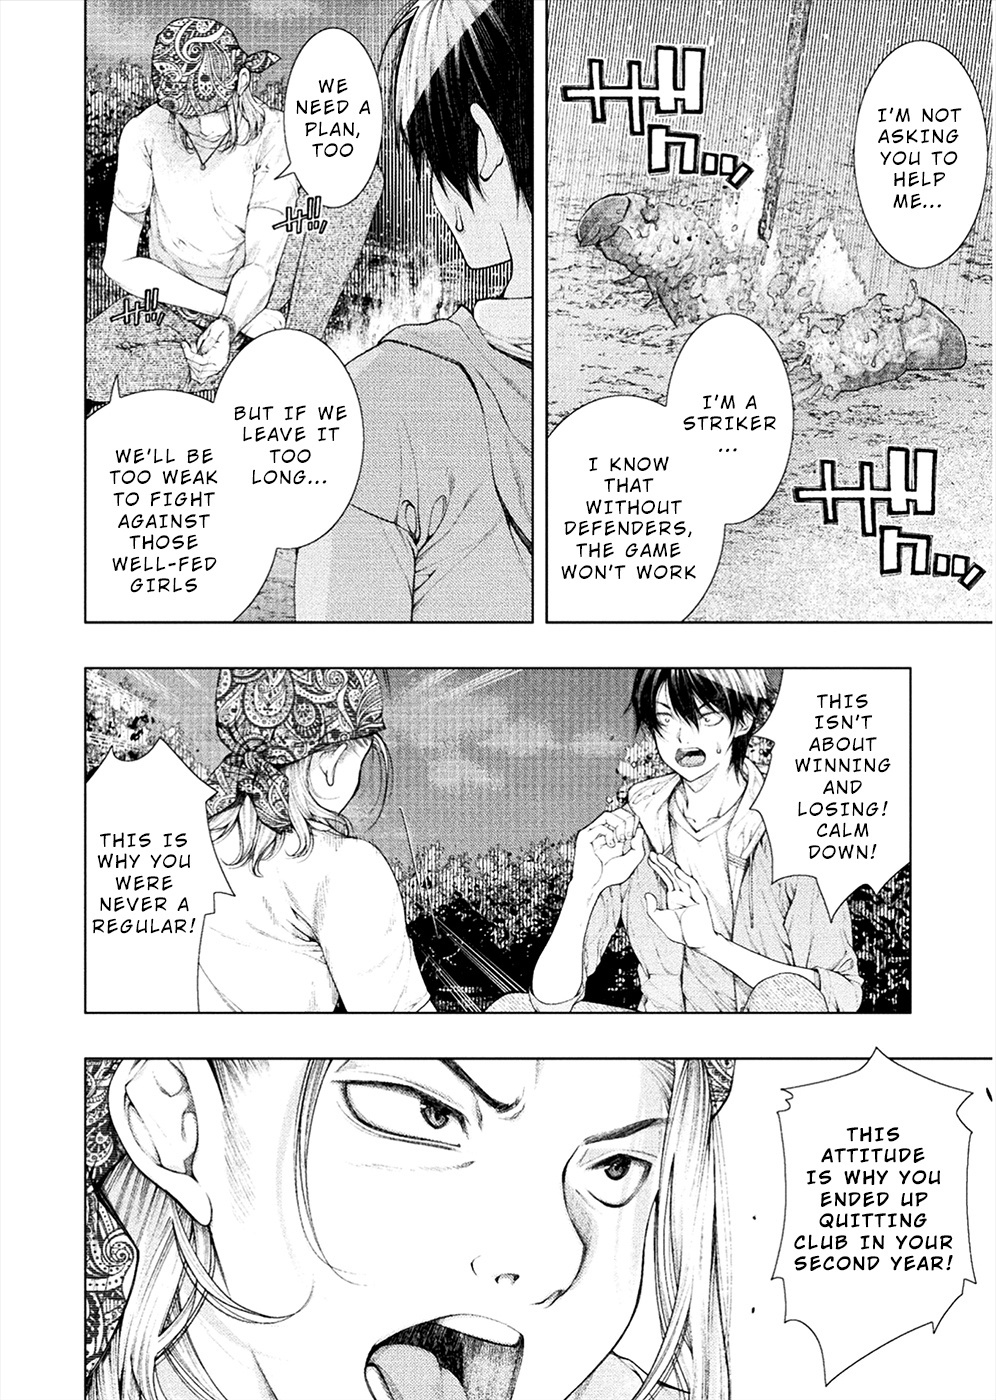 Lovetrap Island - Passion In Distant Lands - Chapter 2 #20